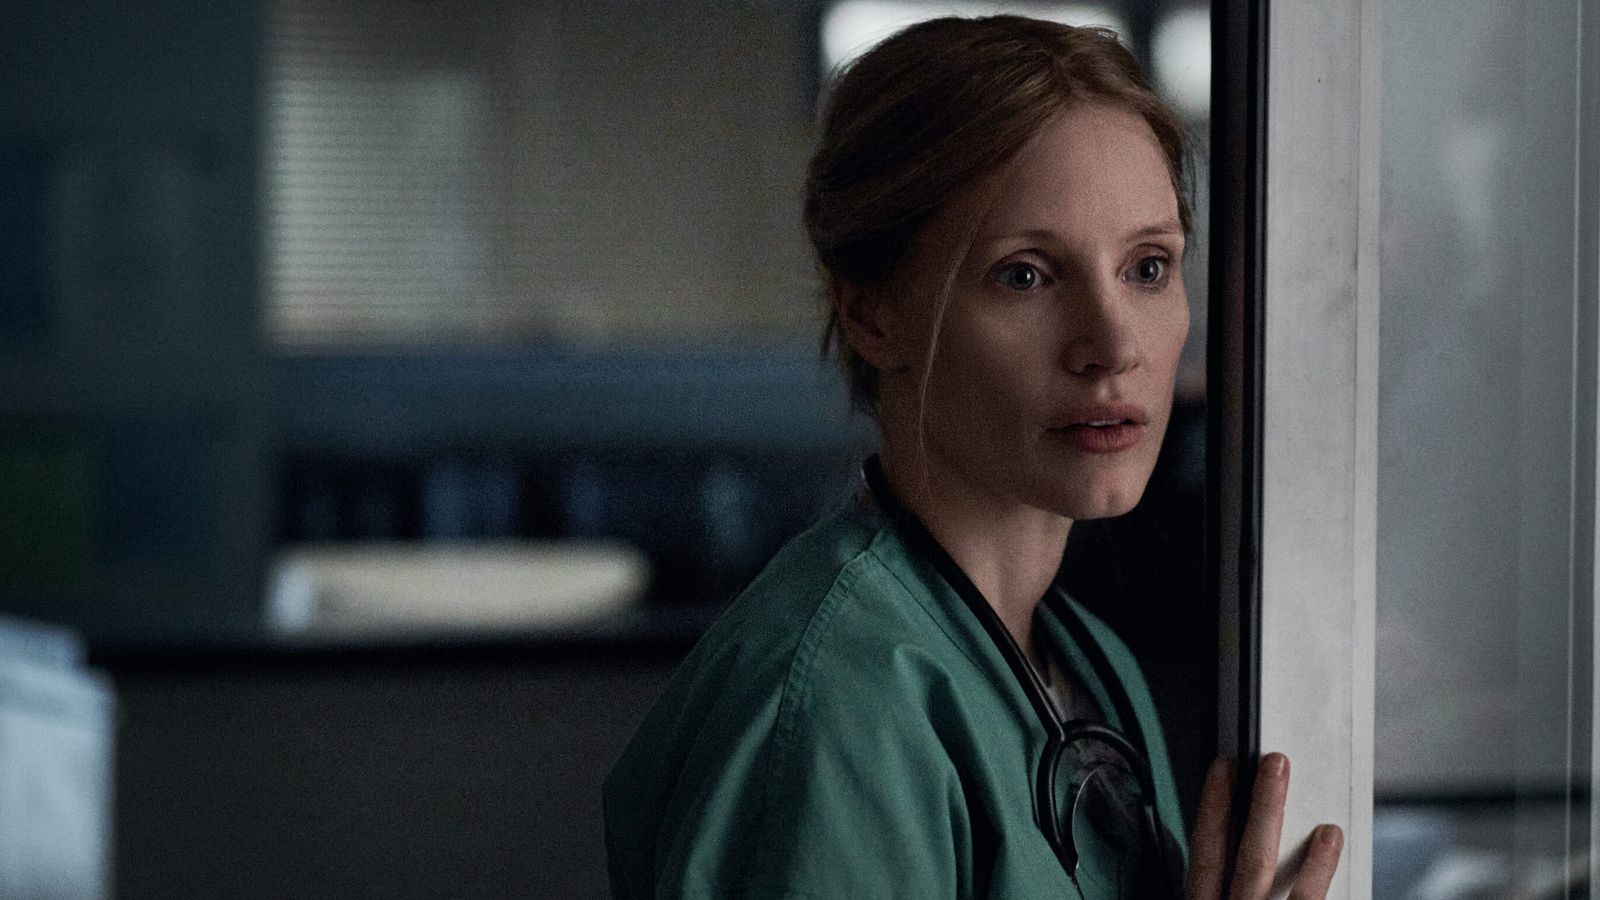 The Good Nurse: Jessica Chastain on playing the real-life nurse who helped catch her serial killer colleague Charles Cullen